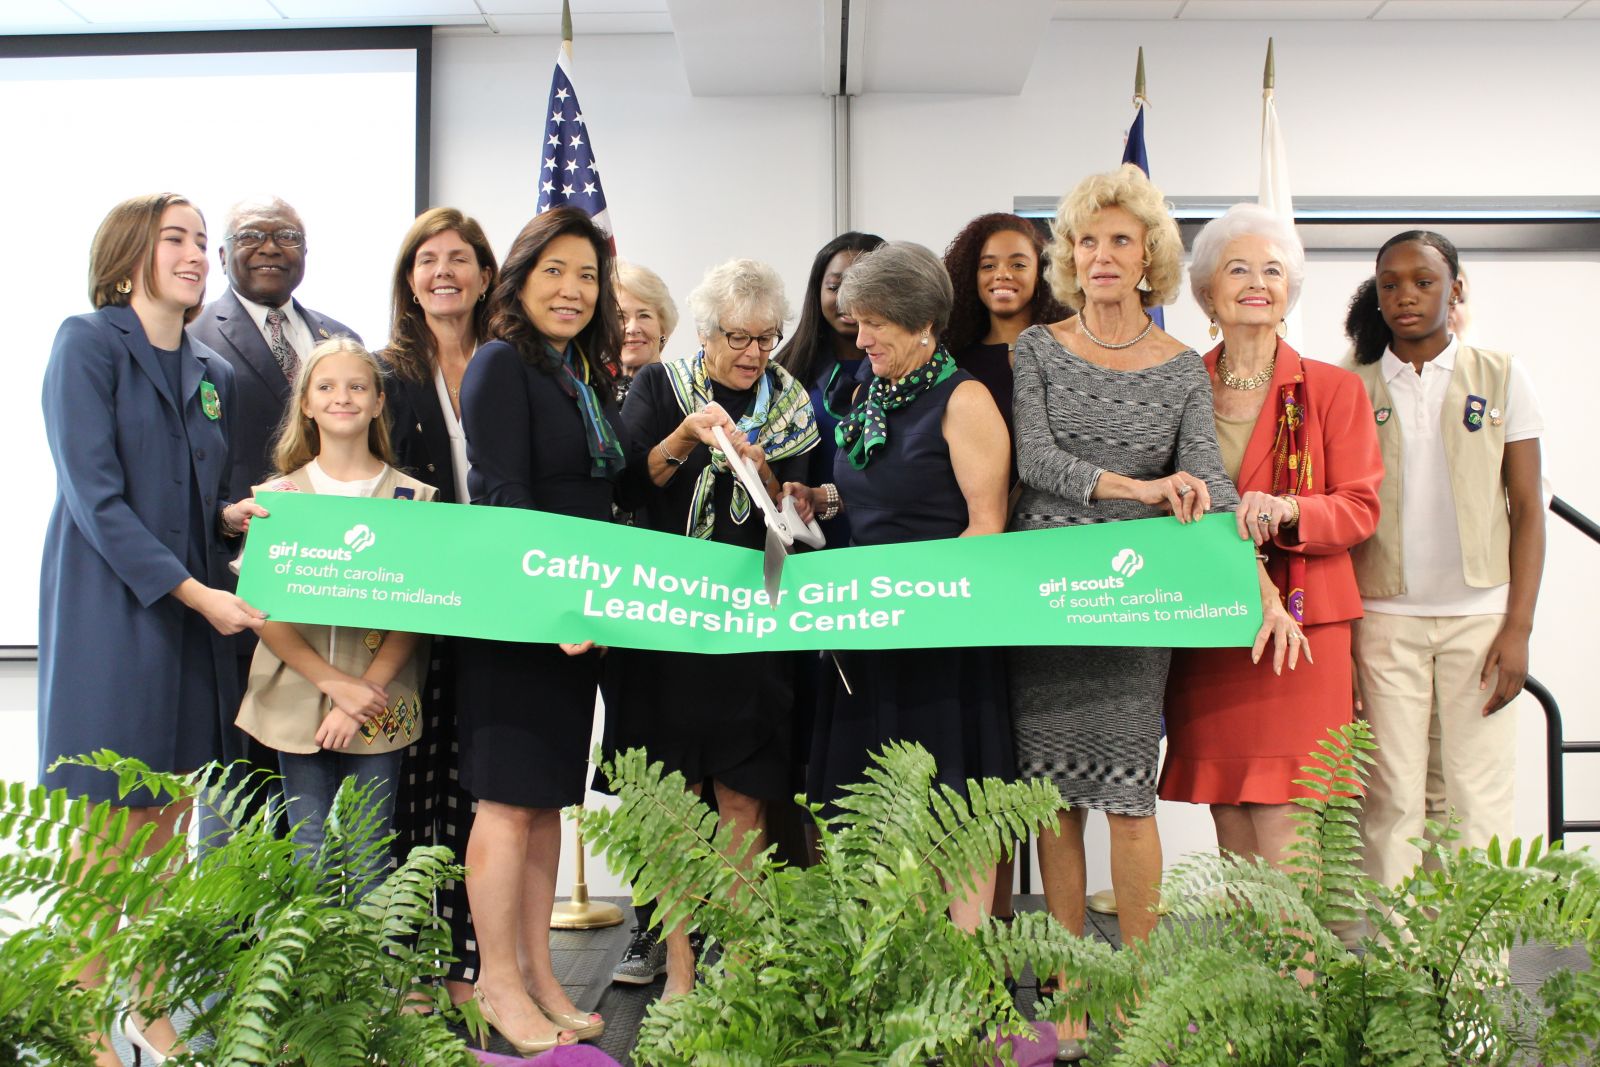 State and community leaders cut the ribbon during the opening of the Cathy Novinger Girl Scout Leadership Center on Saturday. (Photo/Provided)